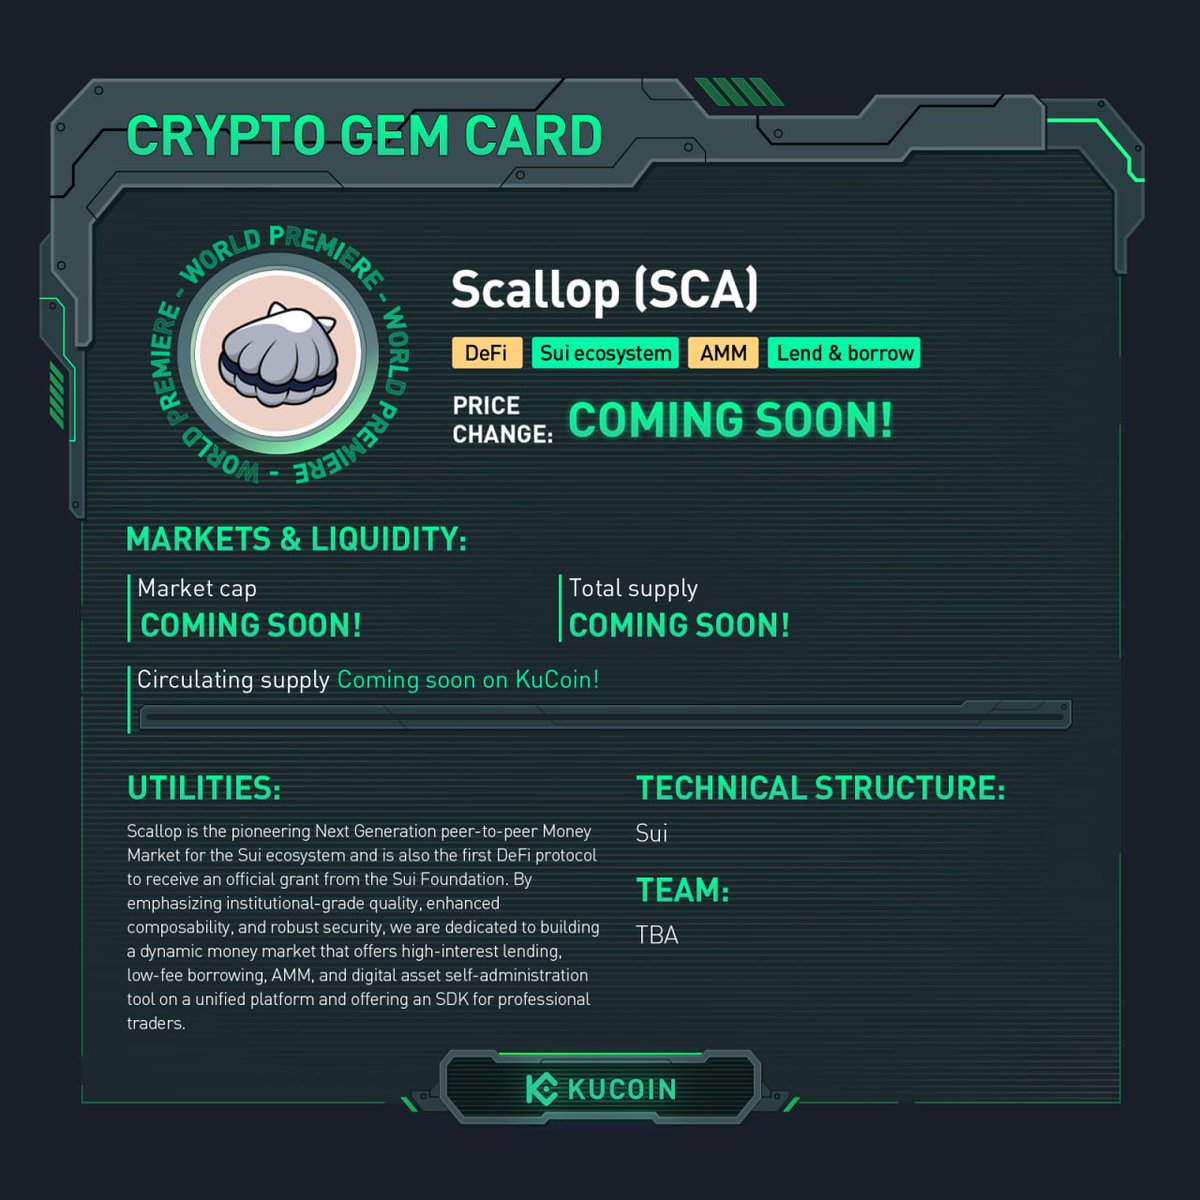 $SCA trading is now live on #KuCoin!

🚀SCA/USDT: trade.kucoin.com/SCA-USDT?utm_s…  

Find out more about Scallop in #KuCoinCryptoGem card.

#DeFi #SuiEcosystem #AMM #LendandBorrow